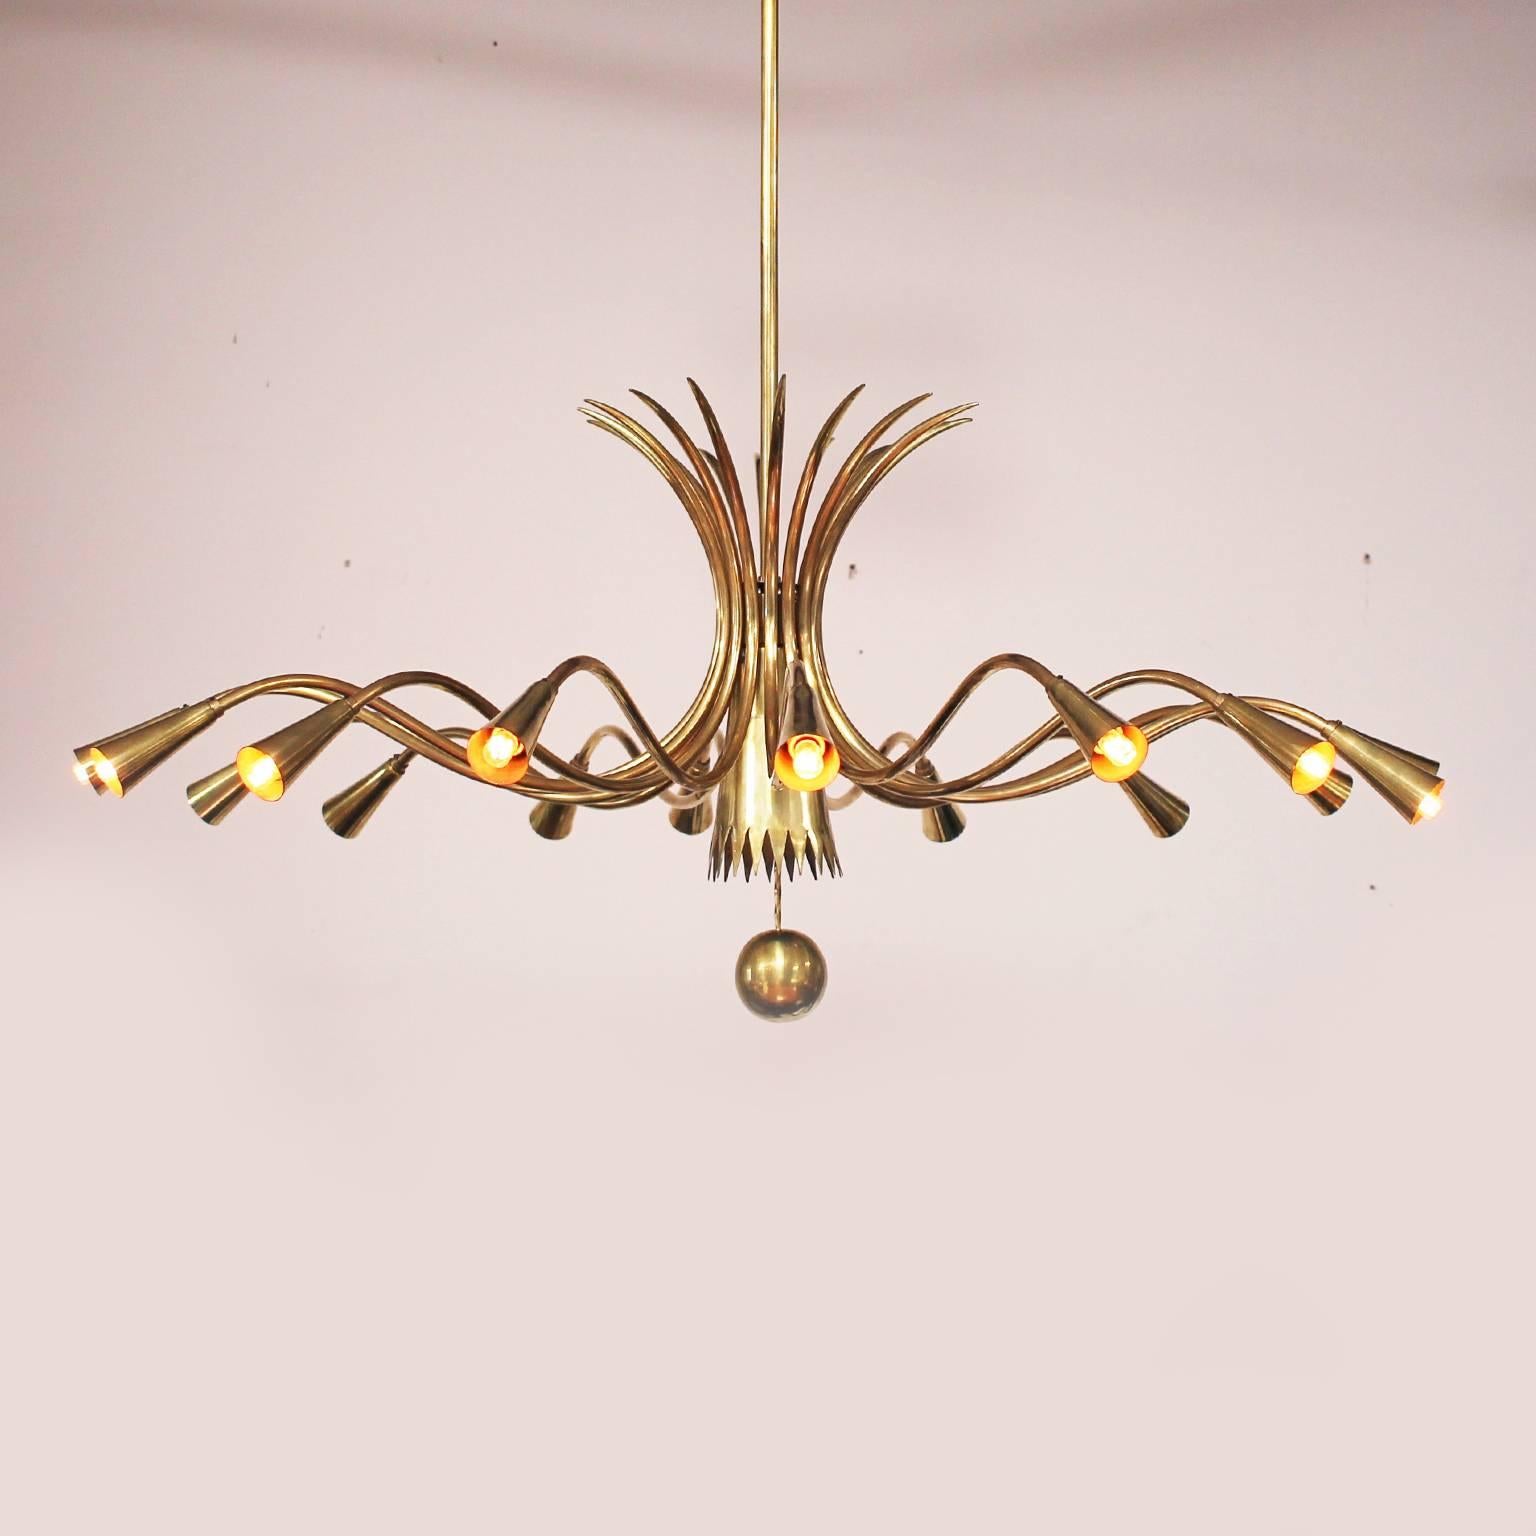 Sixteen-arm elegant curved arms with small sockets. Brass chandelier in the style of Guglielmo Ulrich.

.